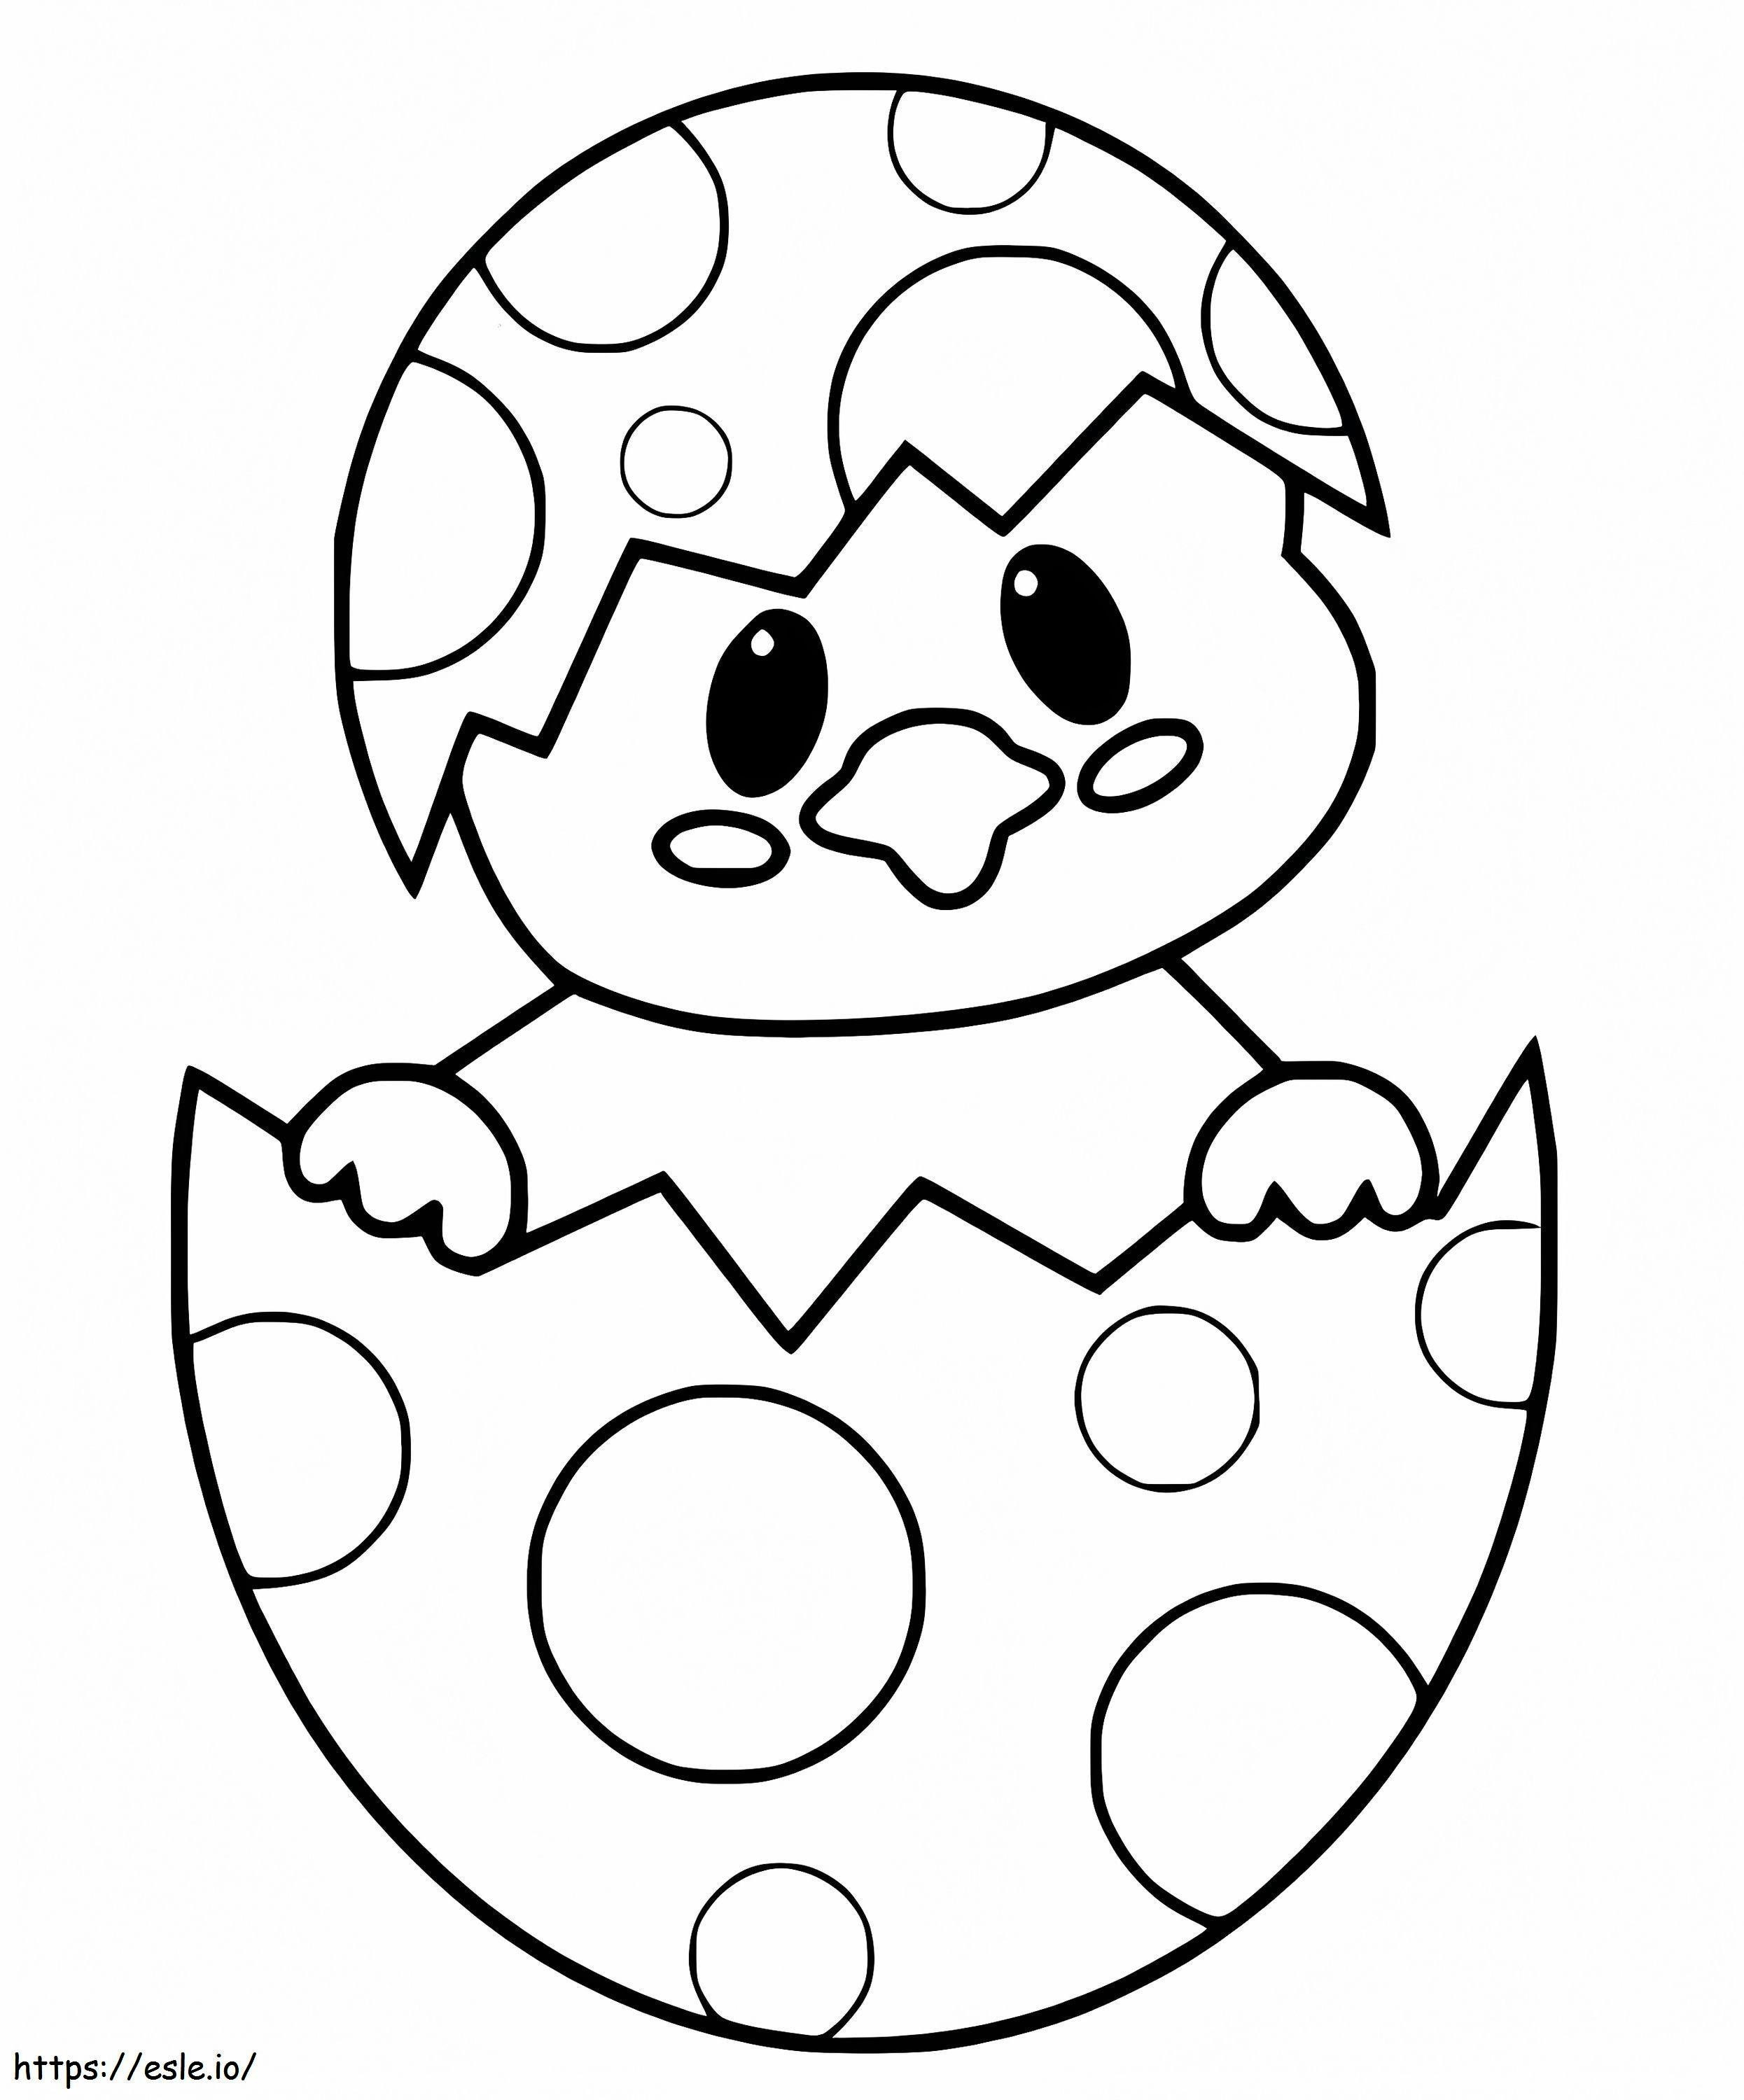 coloring-pages-baby-chicks